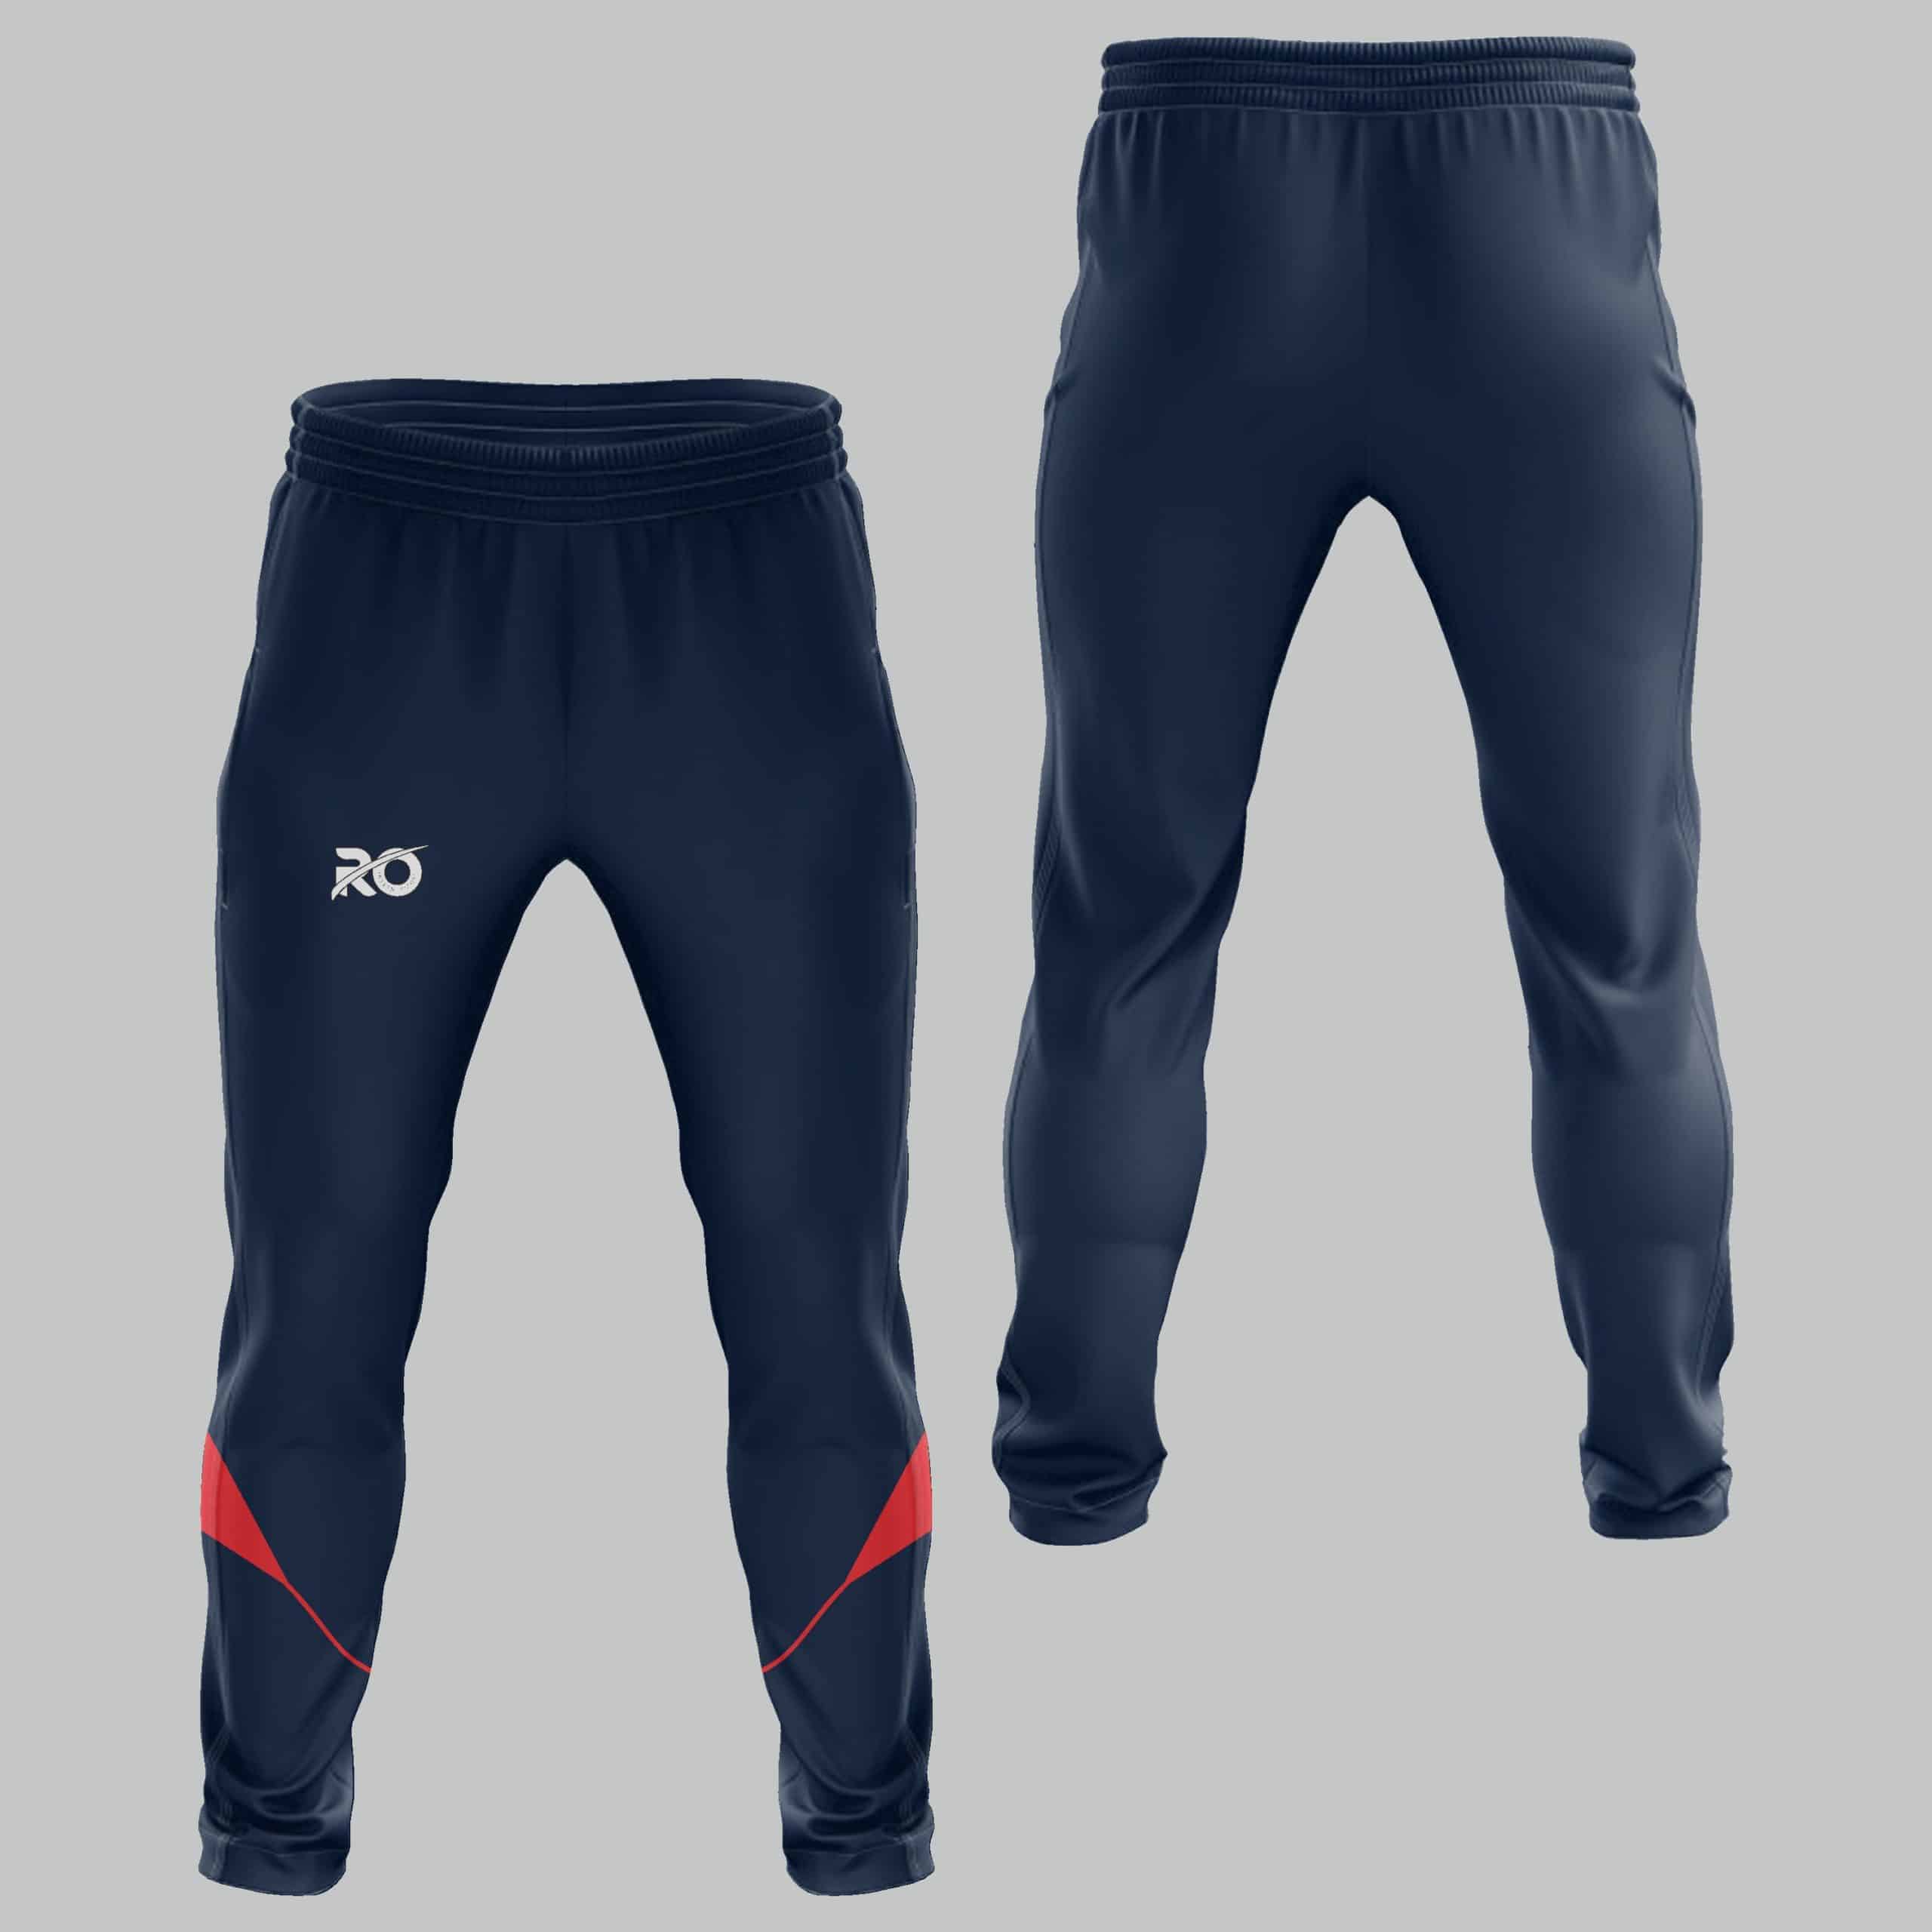 Ro Sports Track Pant Navy Blue Red - RO International